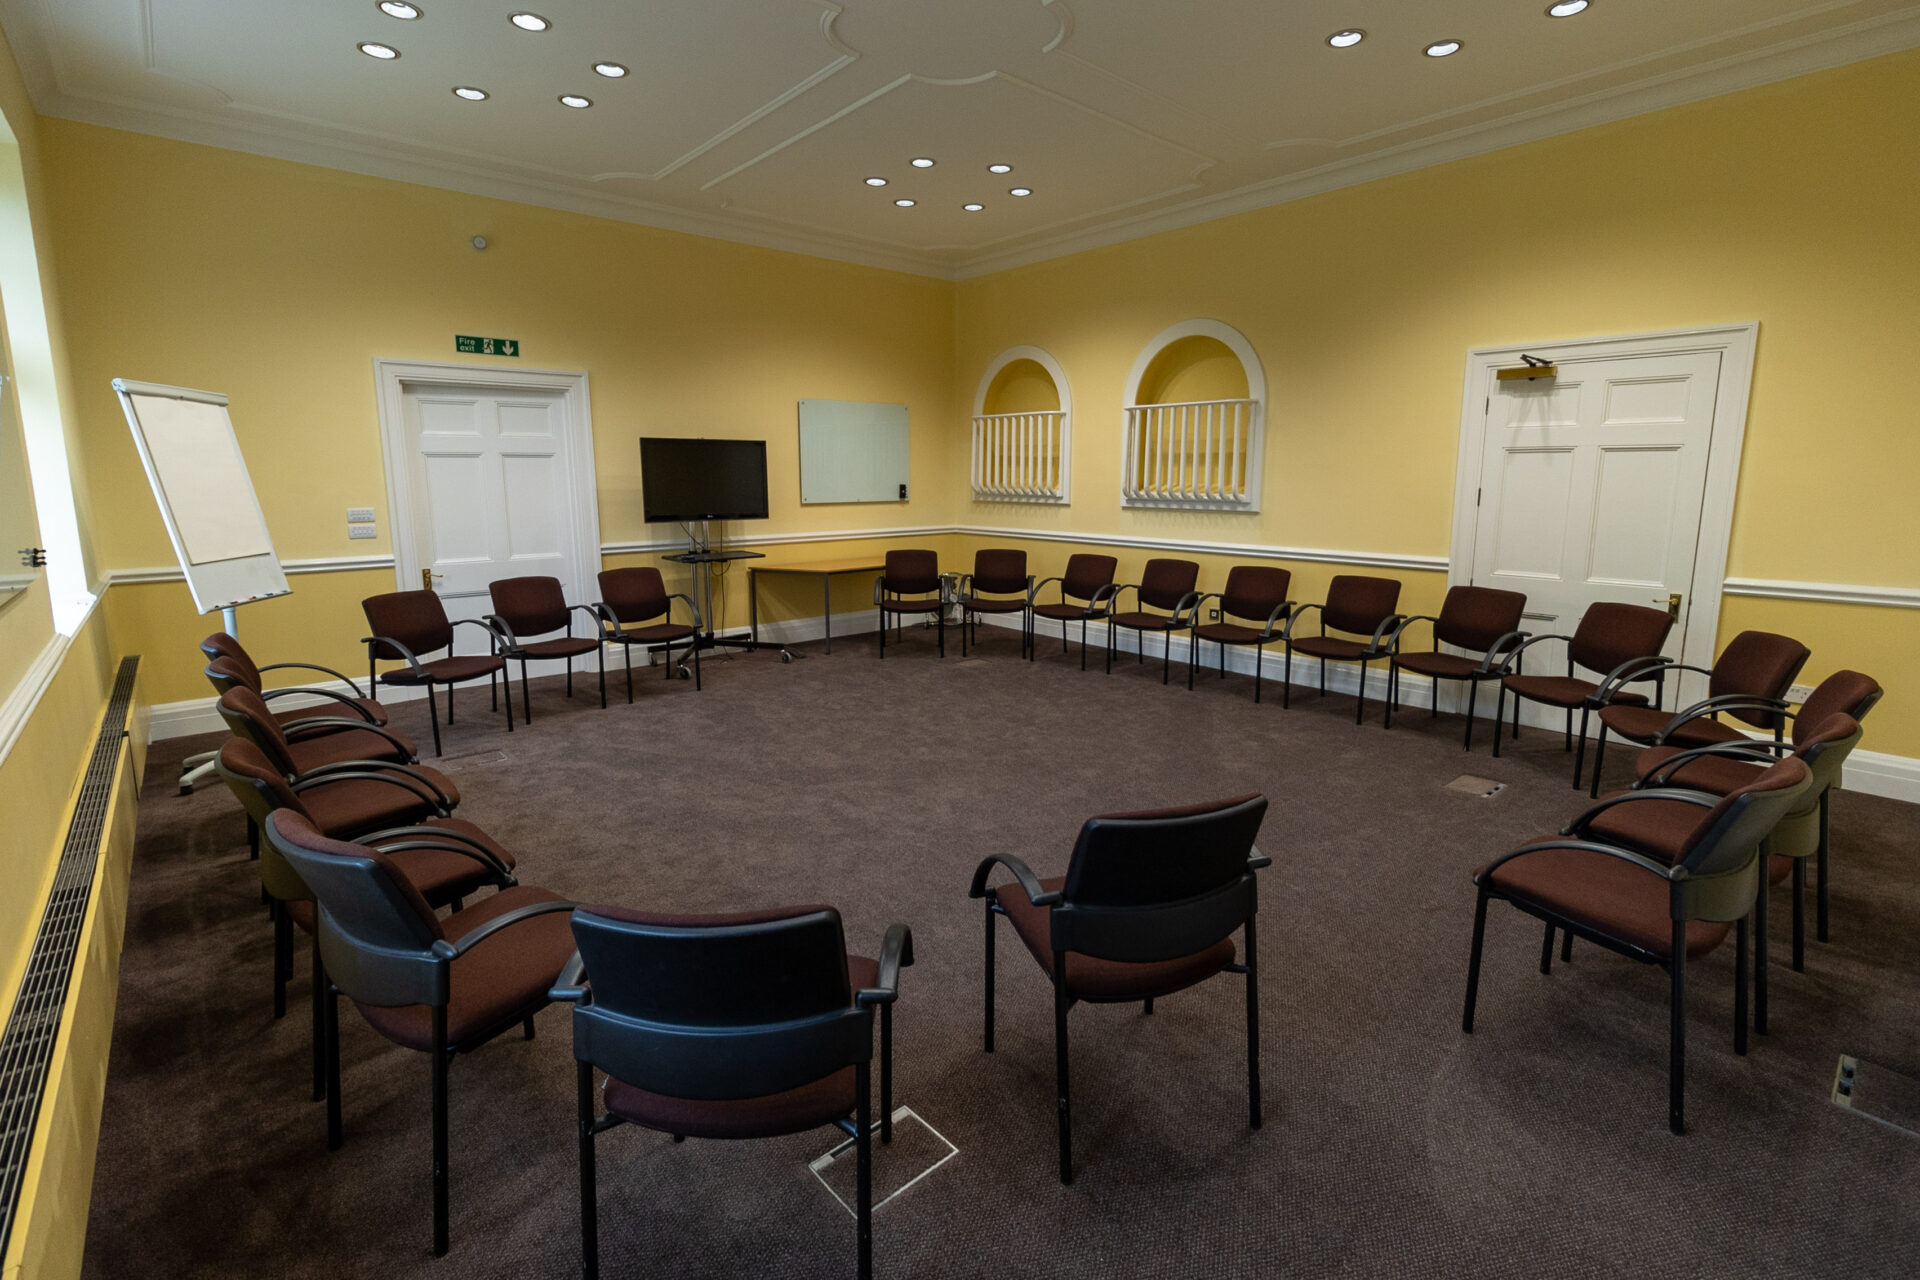 The Greening conference room, laid out in a circle to accommodate up to 22 people.